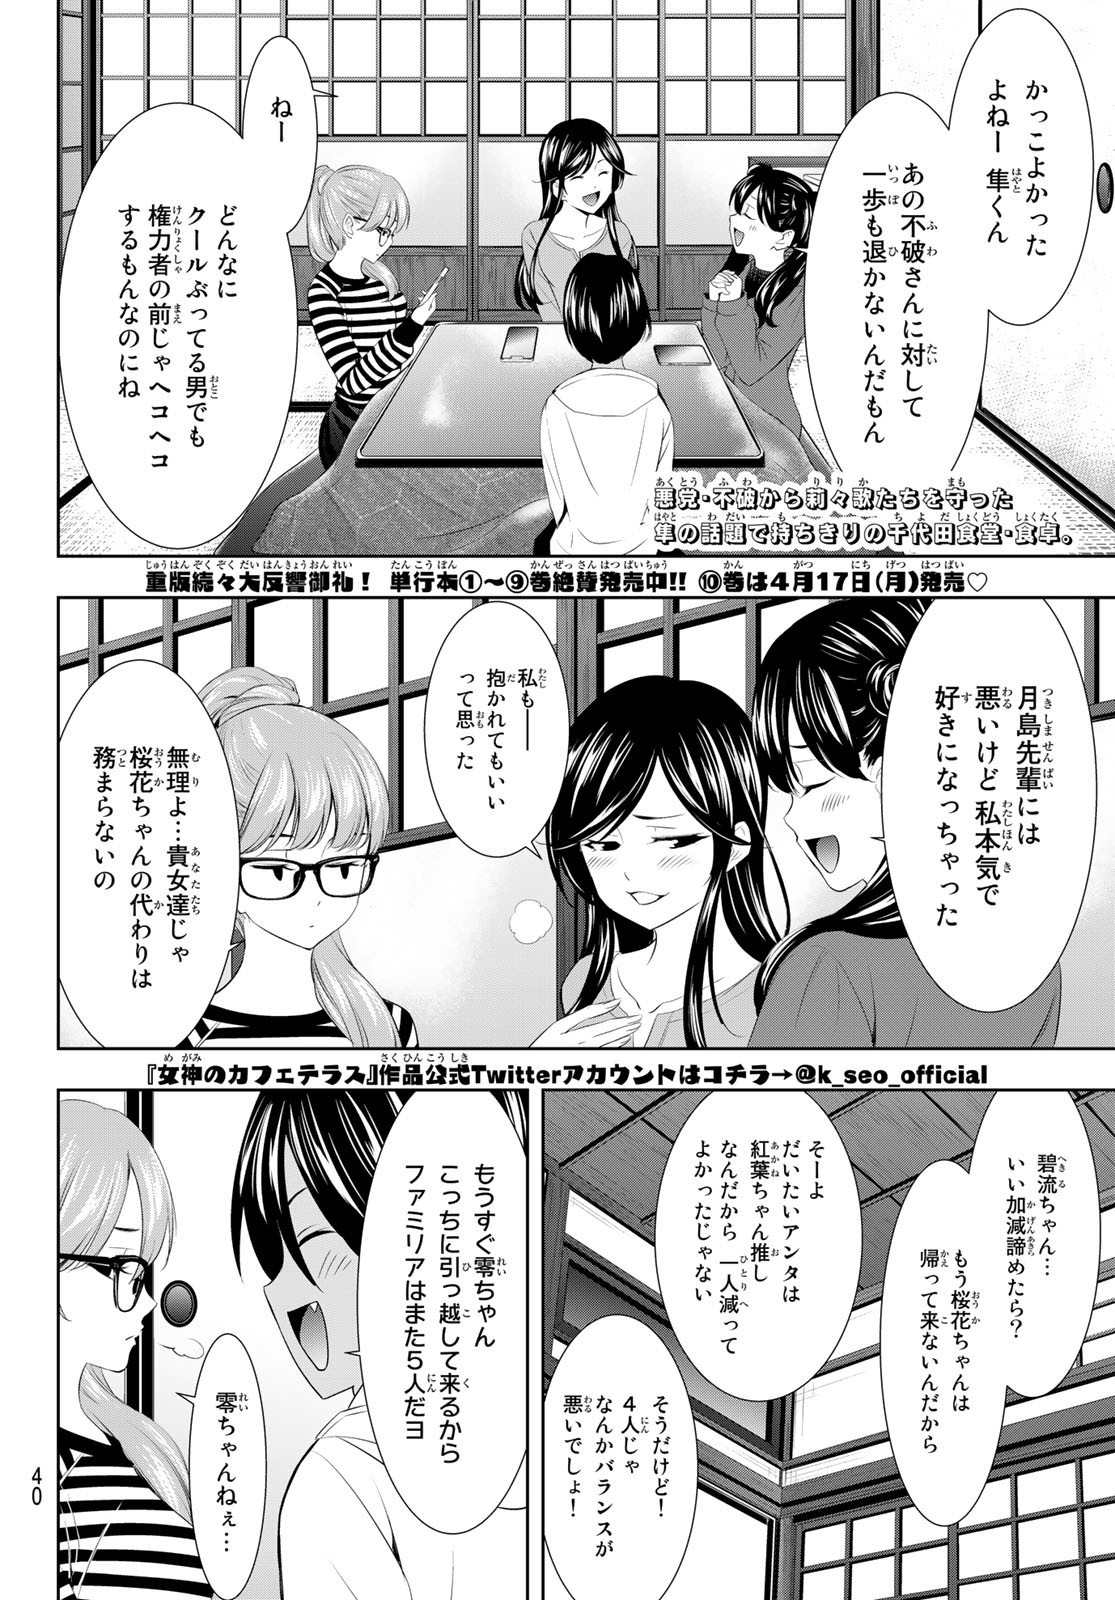 Goddess-Cafe-Terrace - Chapter 096 - Page 2